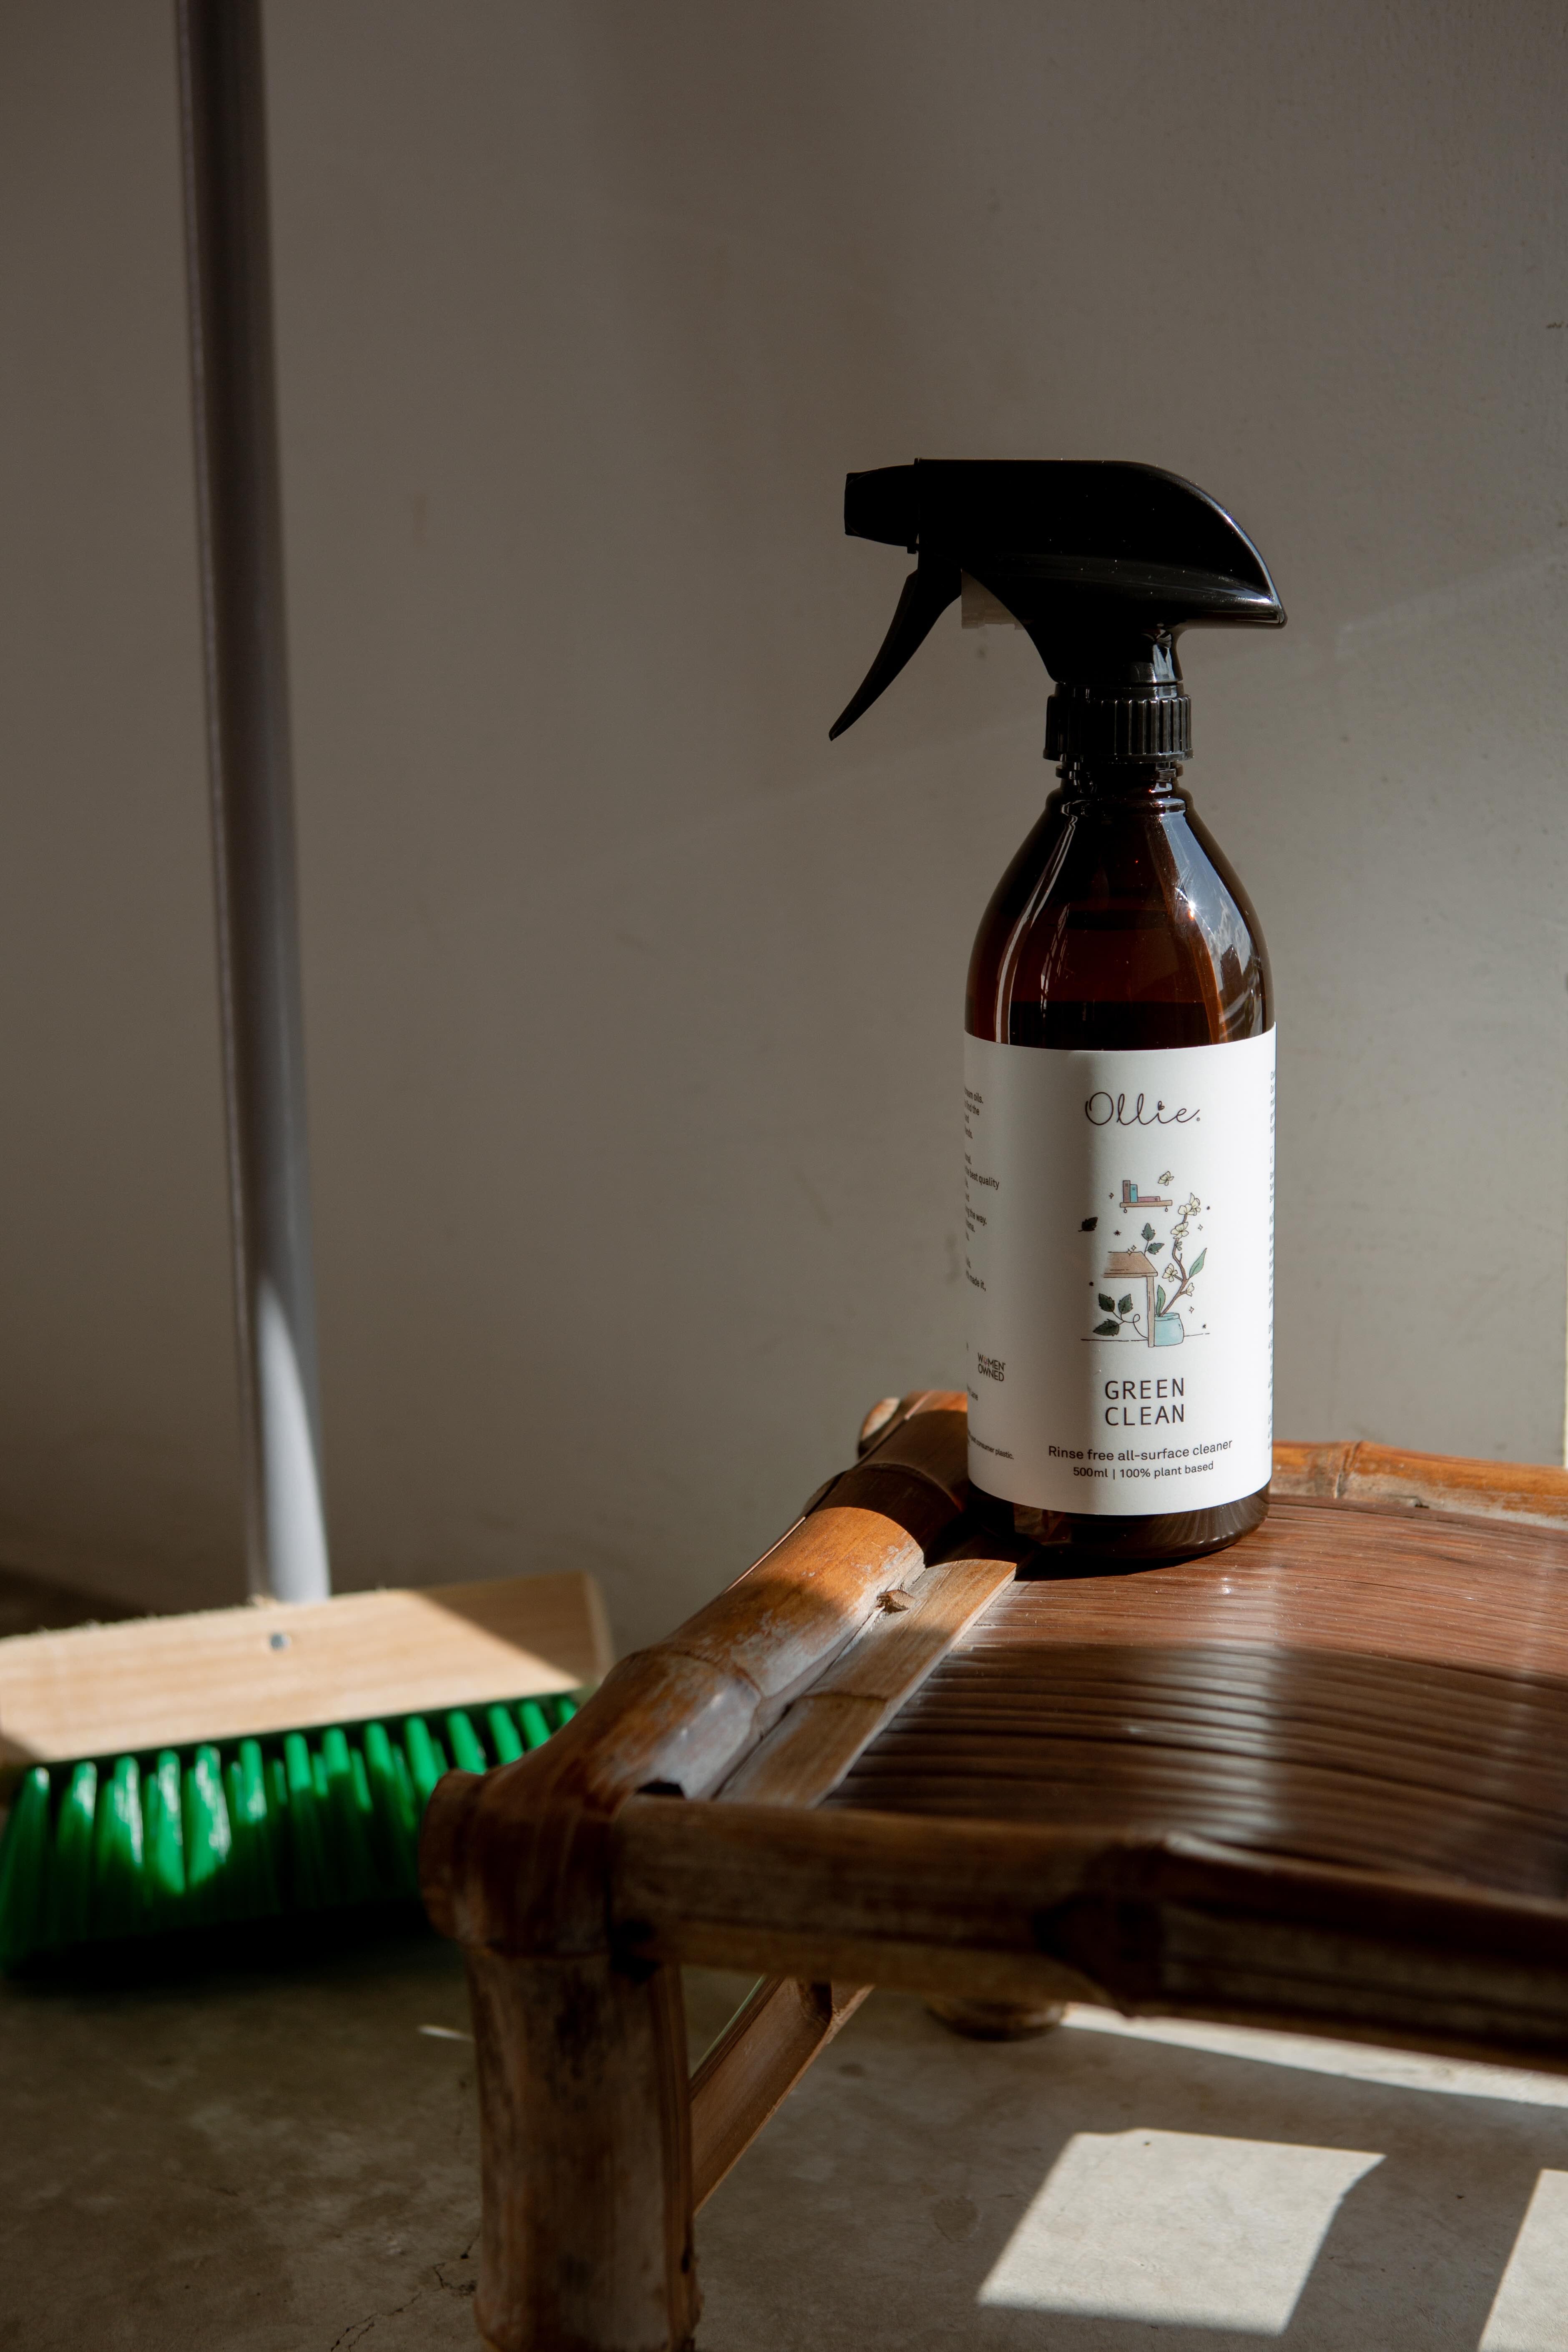 Ollie Green Clean Surface Cleaner, PH-balanced & non-toxic cleaner | Cleaning supplies | The Green Collective SG